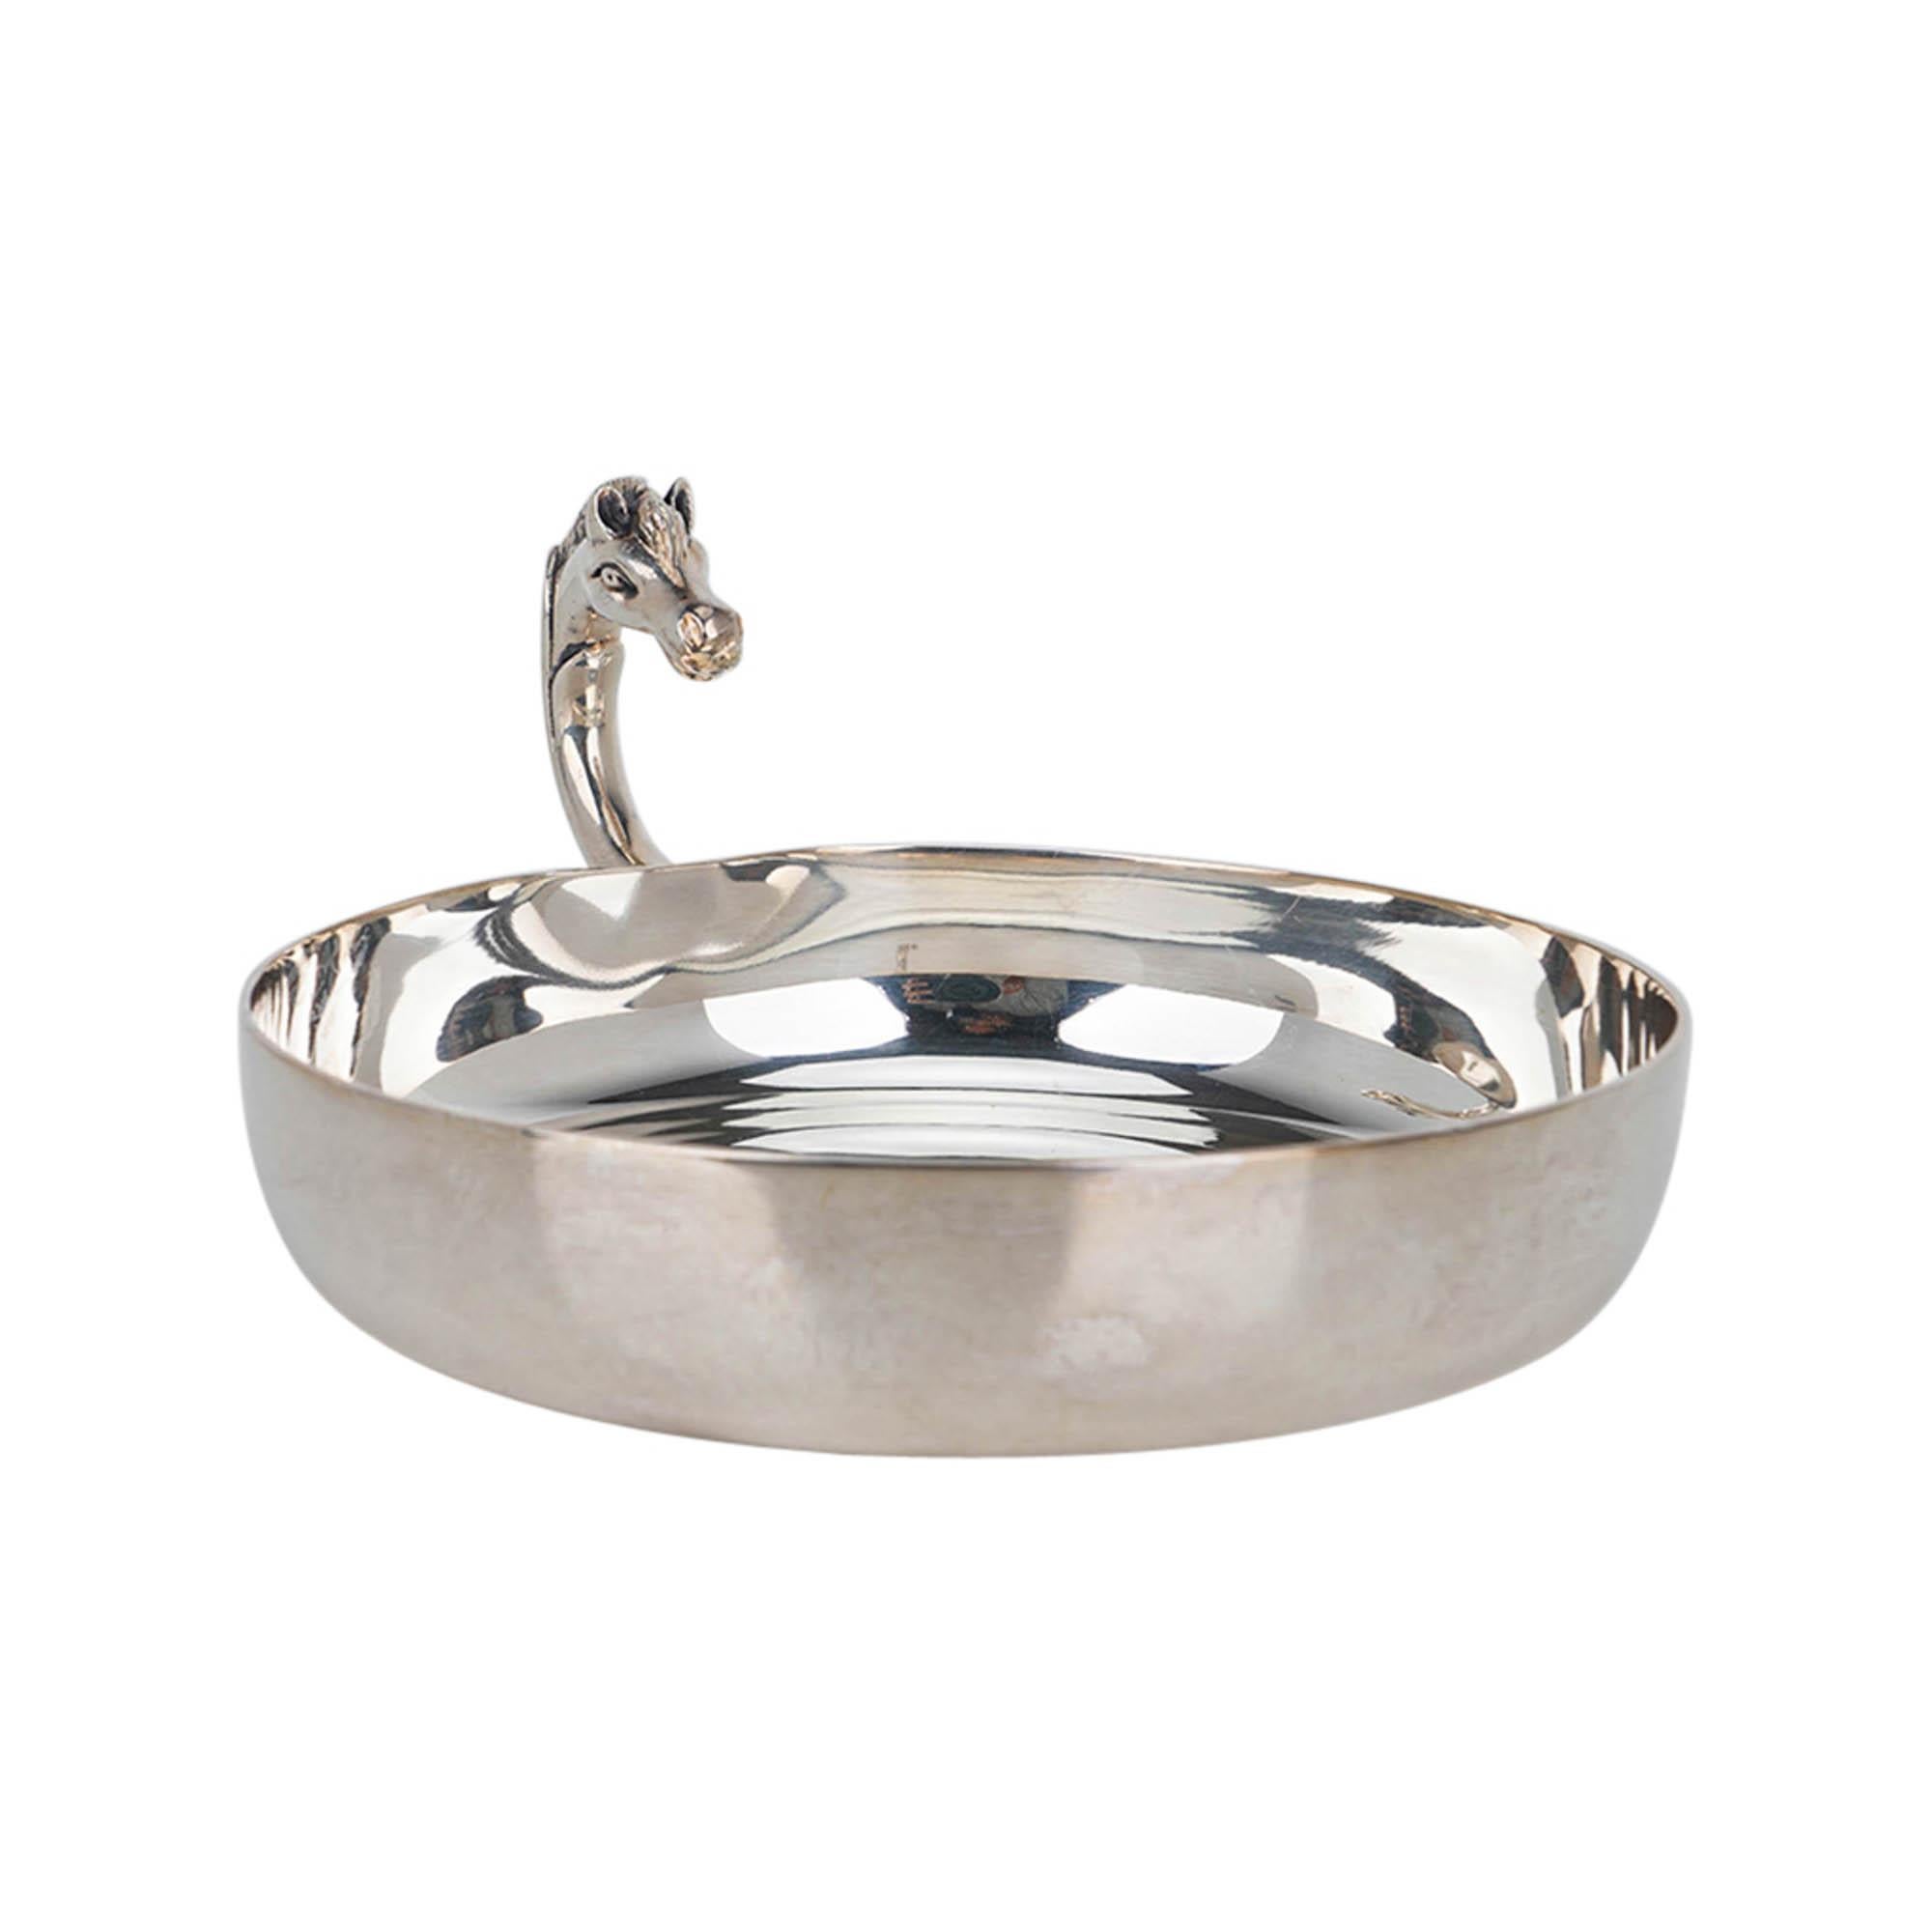 Hermes Silver Horse Head Catch All Pin Tray For Sale 2